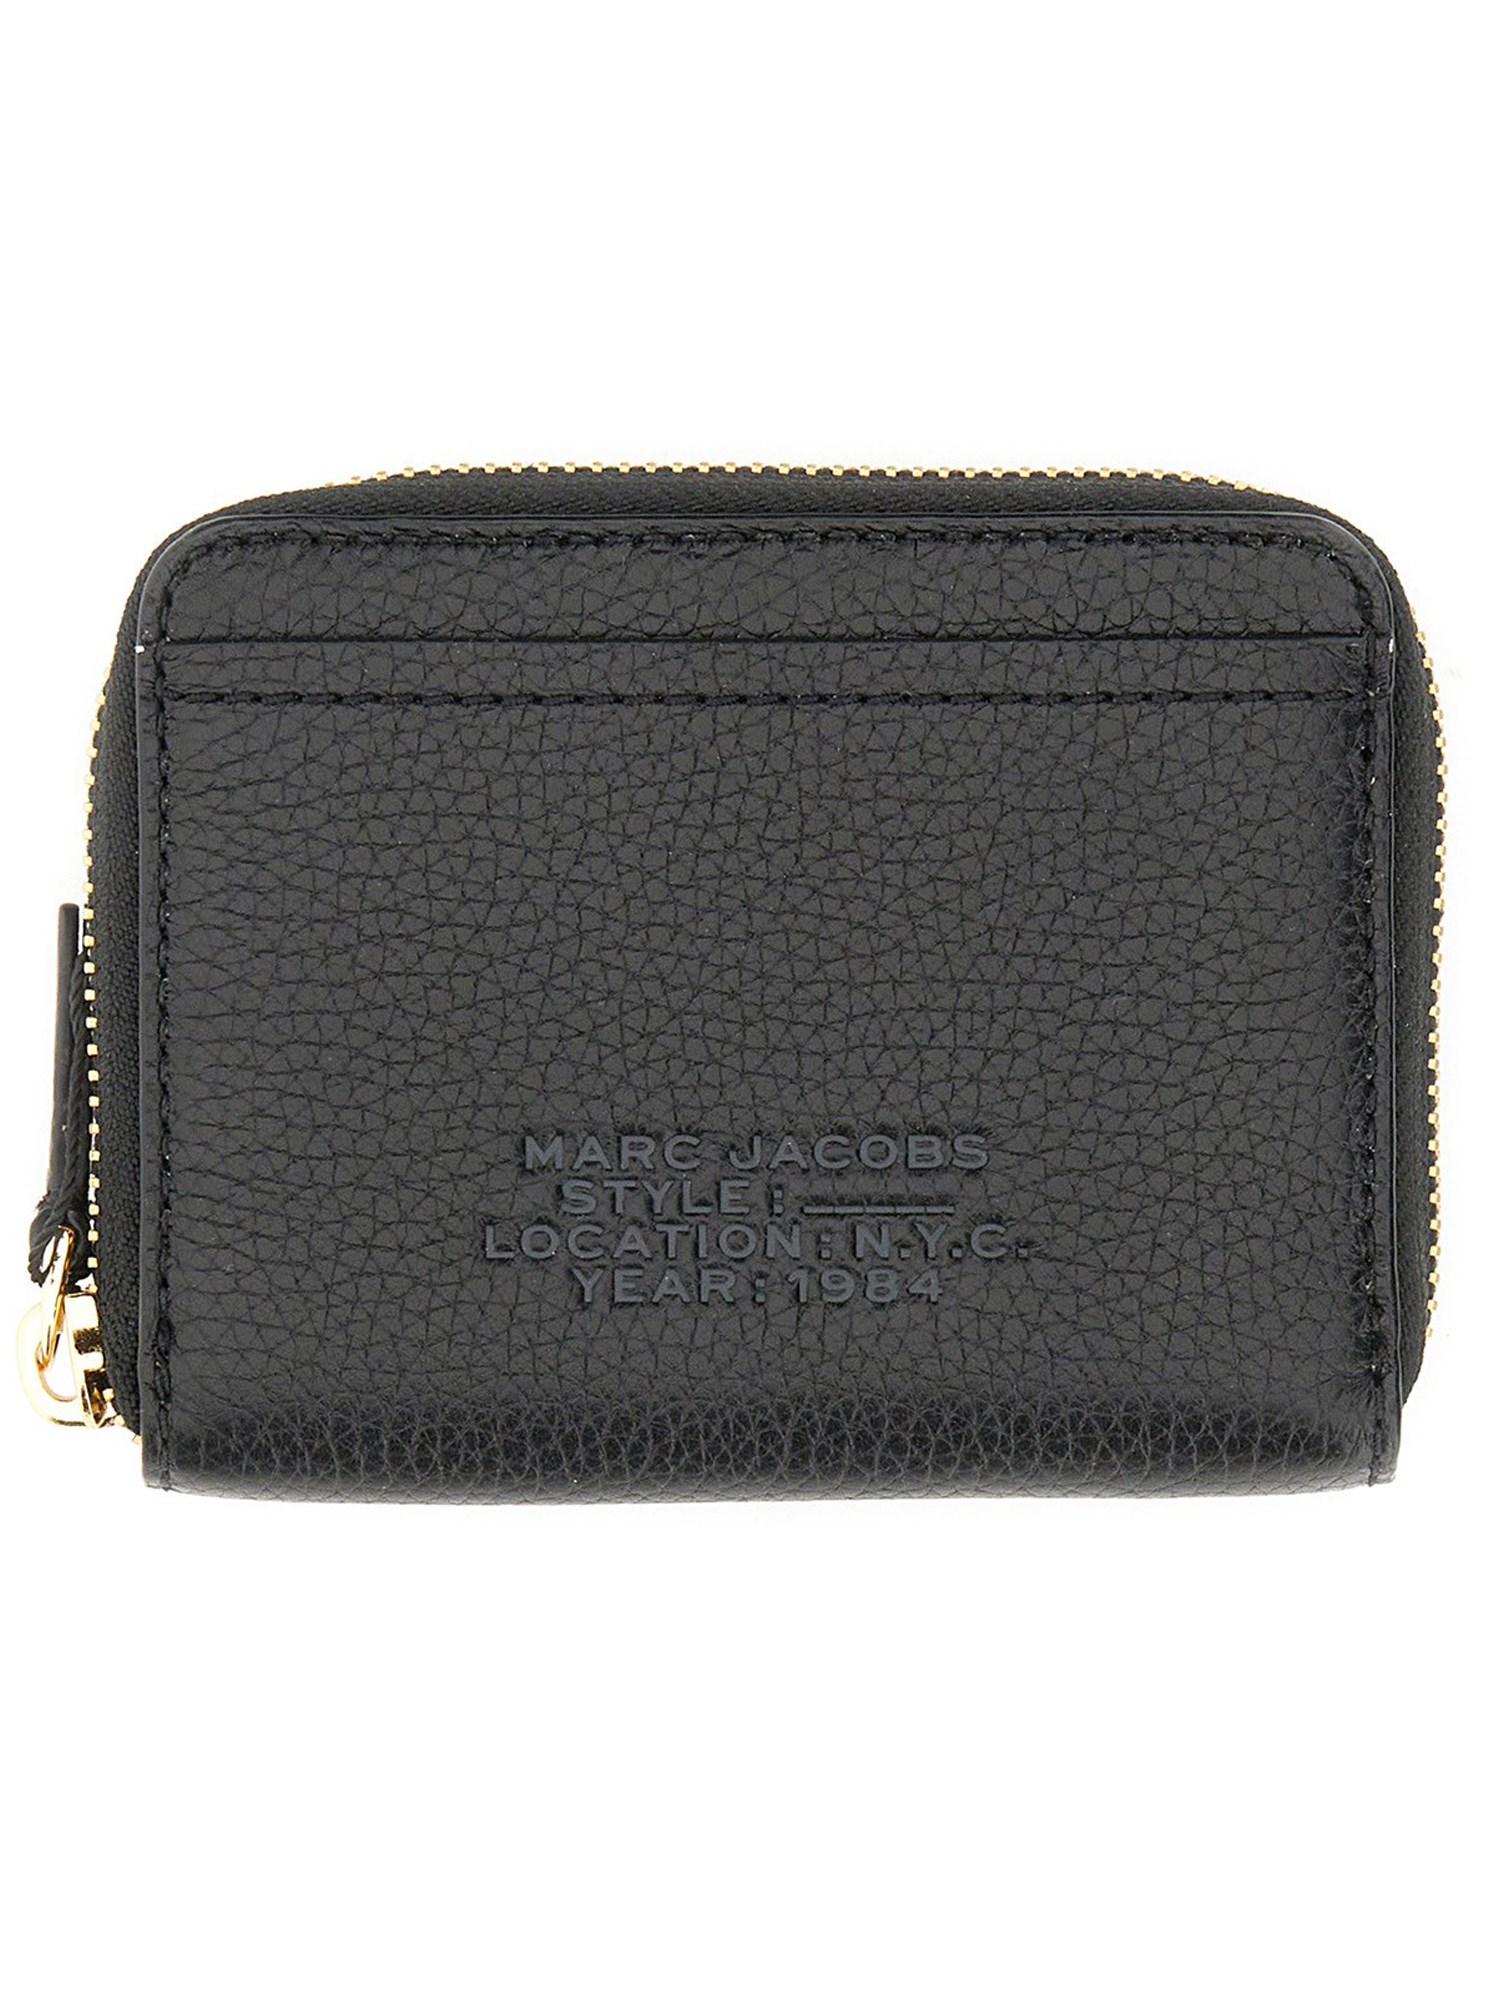 marc jacobs leather wallet with zipper